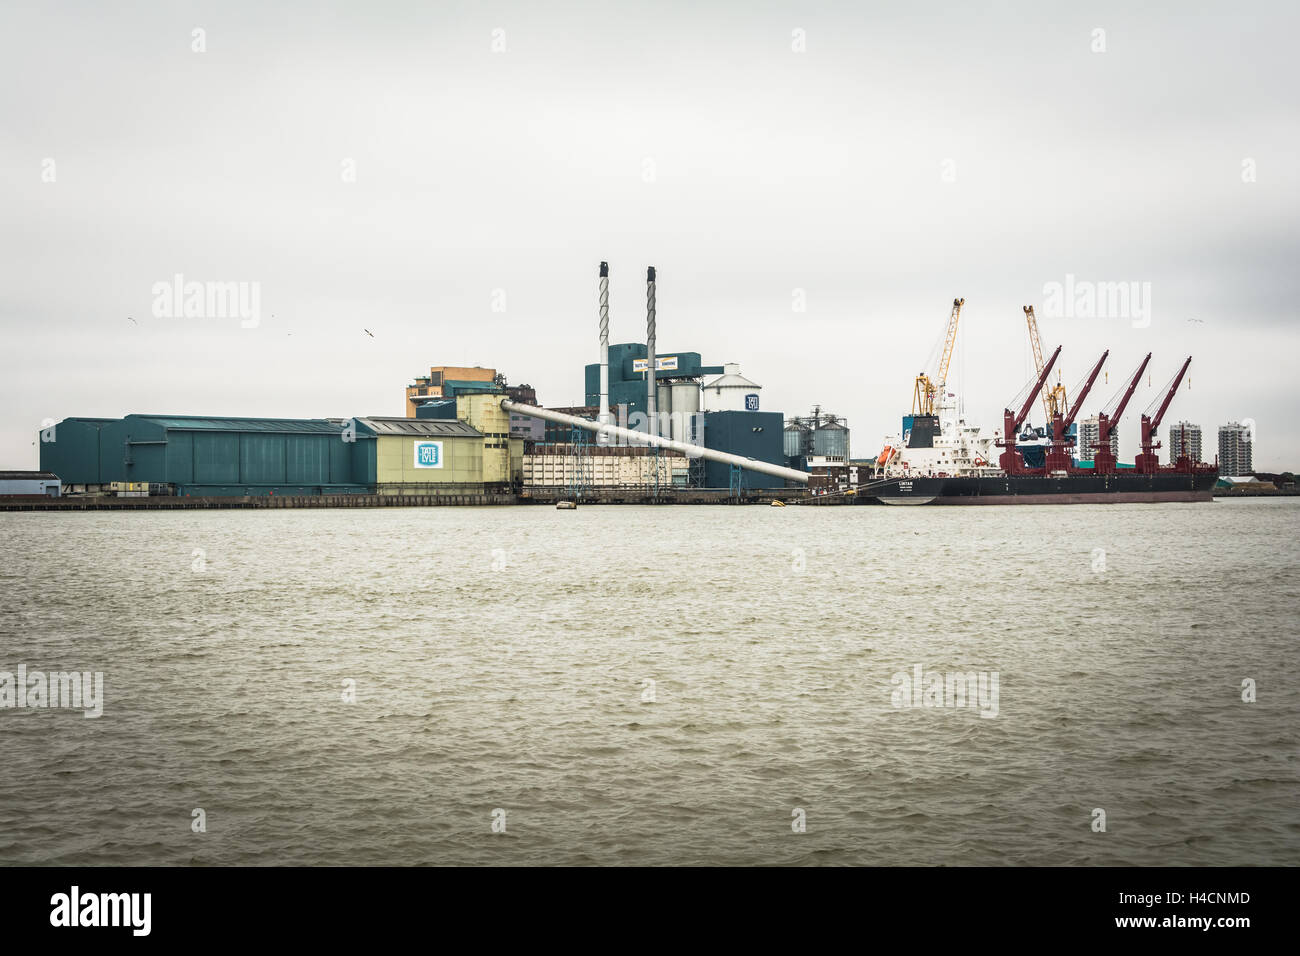 The Tate and Lyle sugar refinery factory in Silvertown near London City Airport, UK Stock Photo